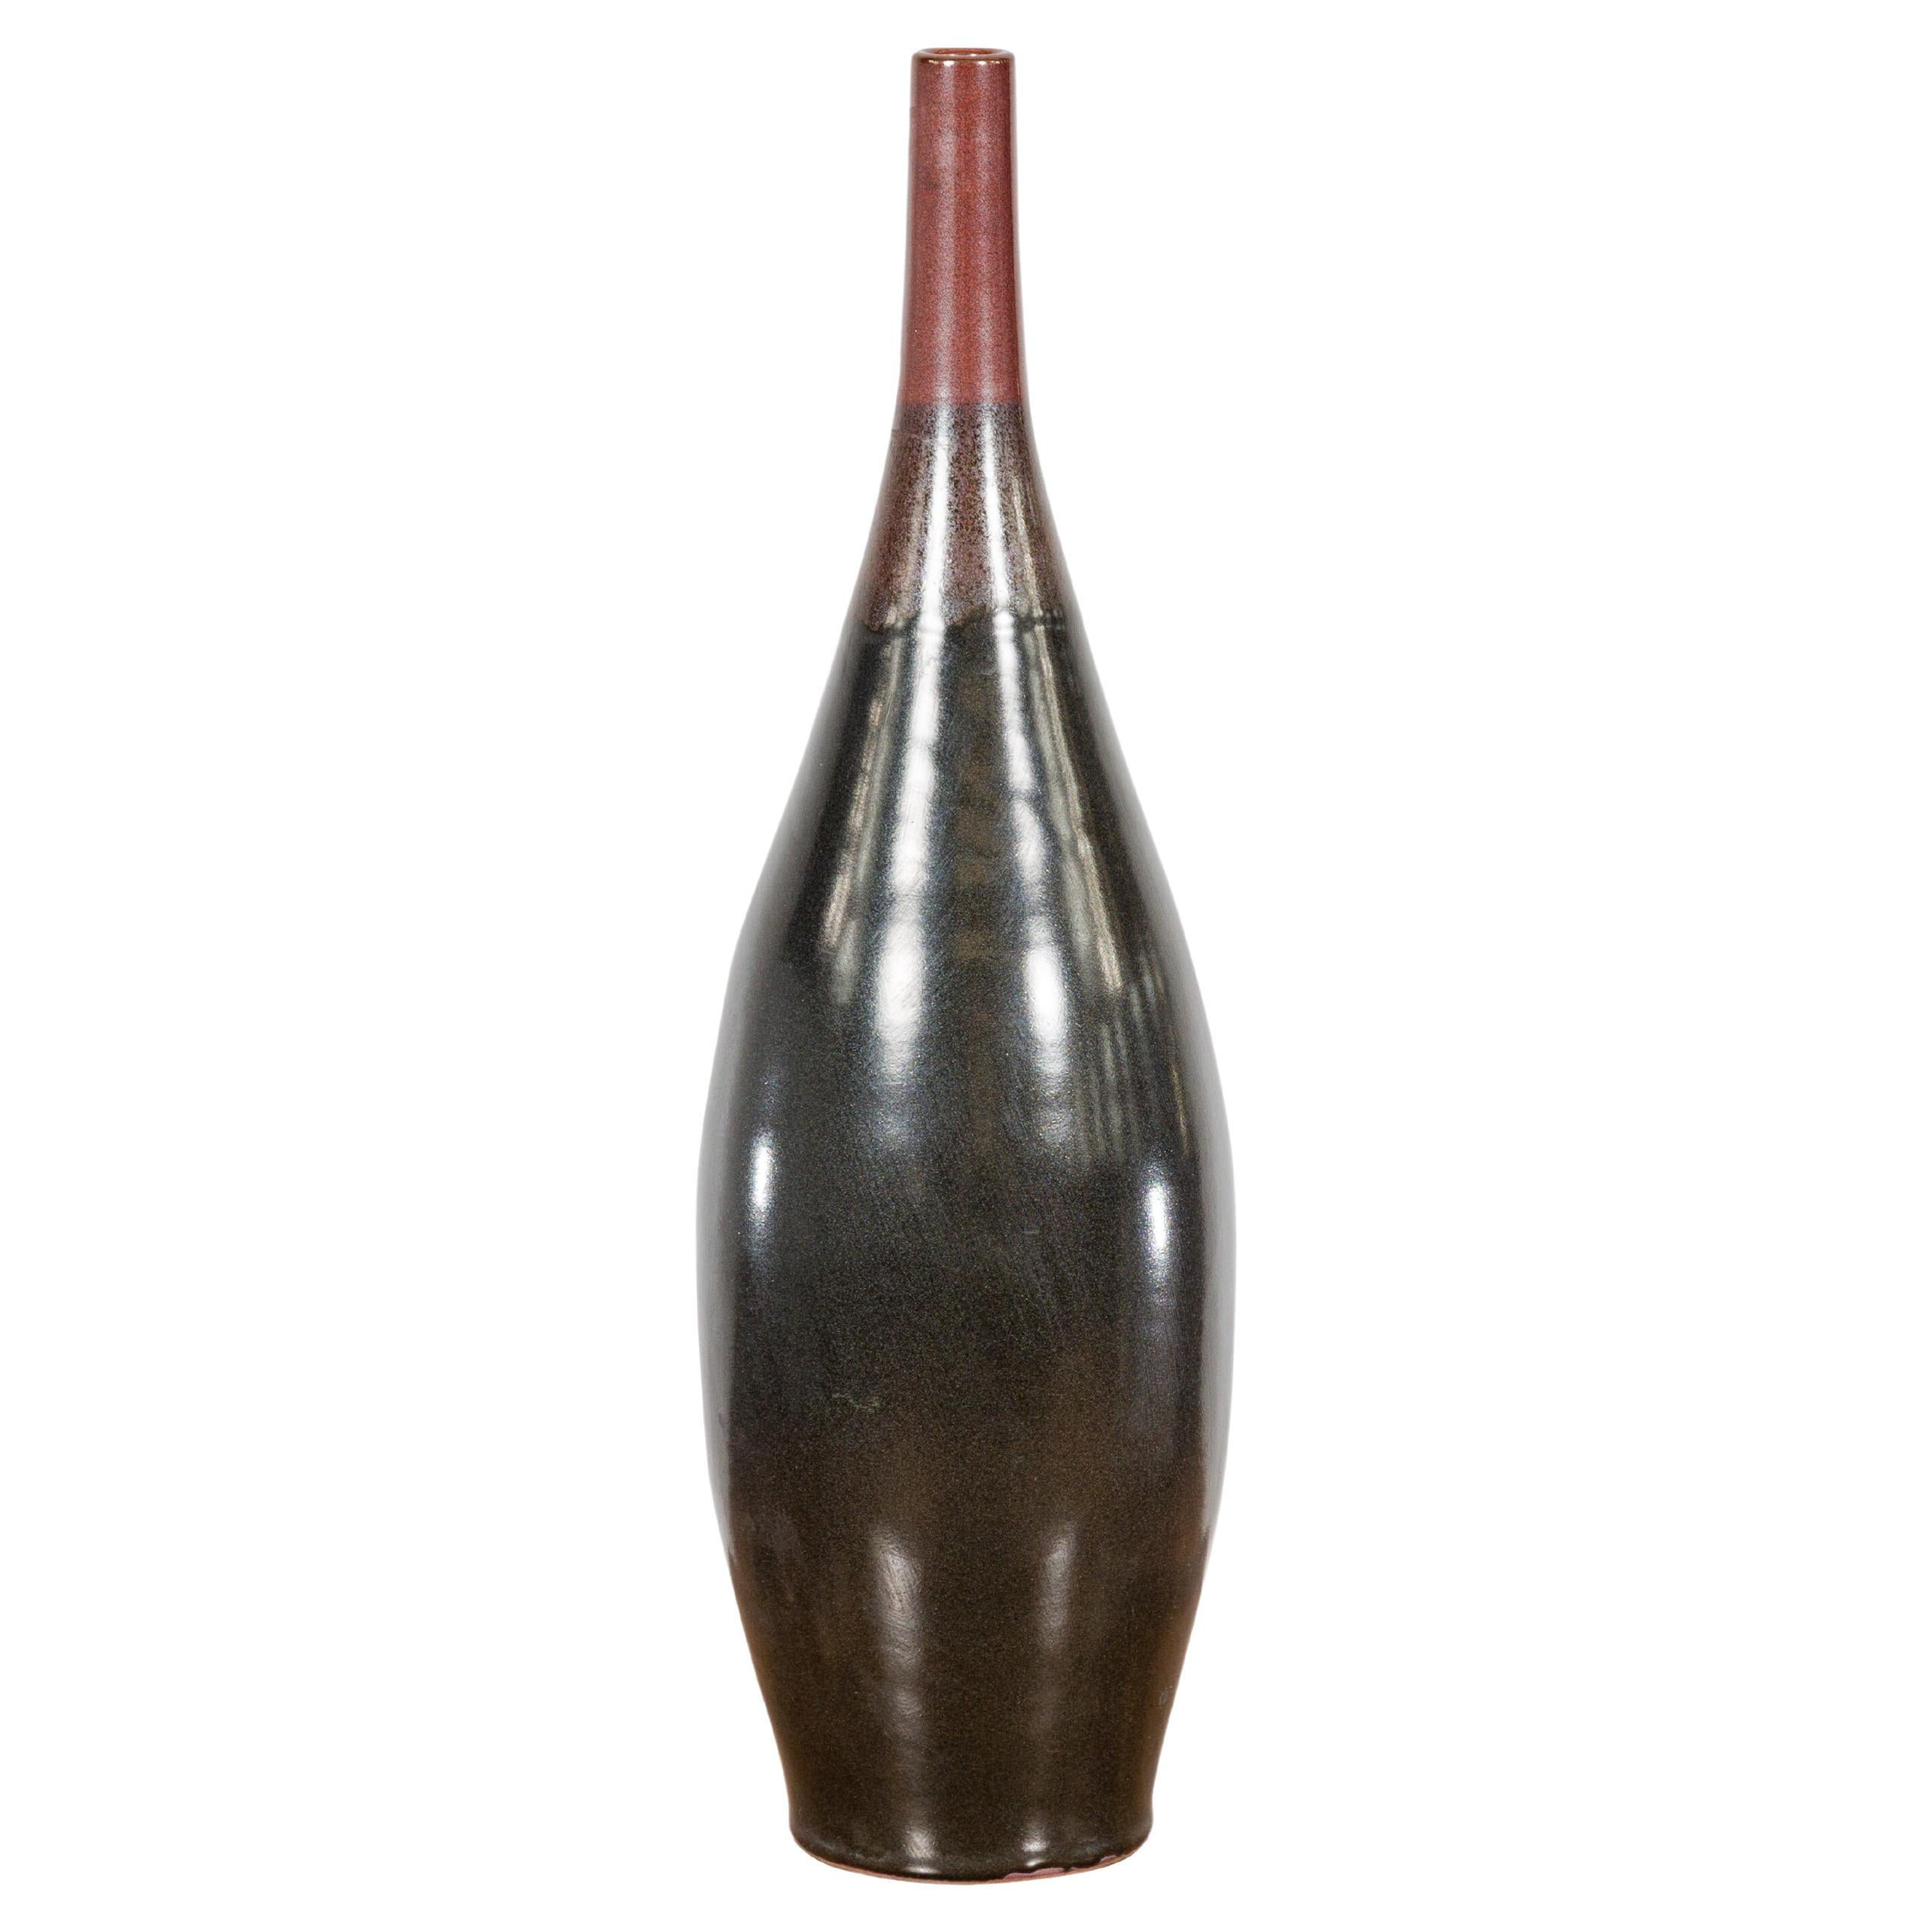 Sleek Multi-Color Glazed Red, Brown and Black Ceramic Vase with Narrow Mouth